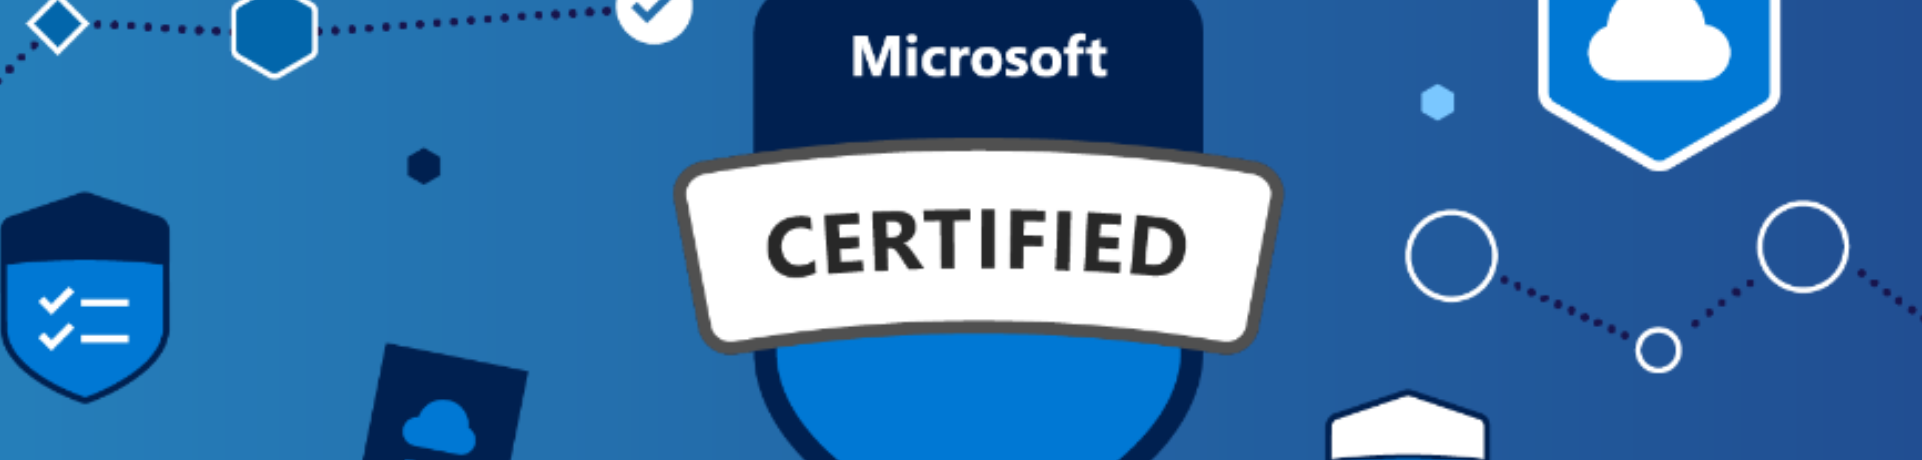 How Microsoft certifications help your career featured image